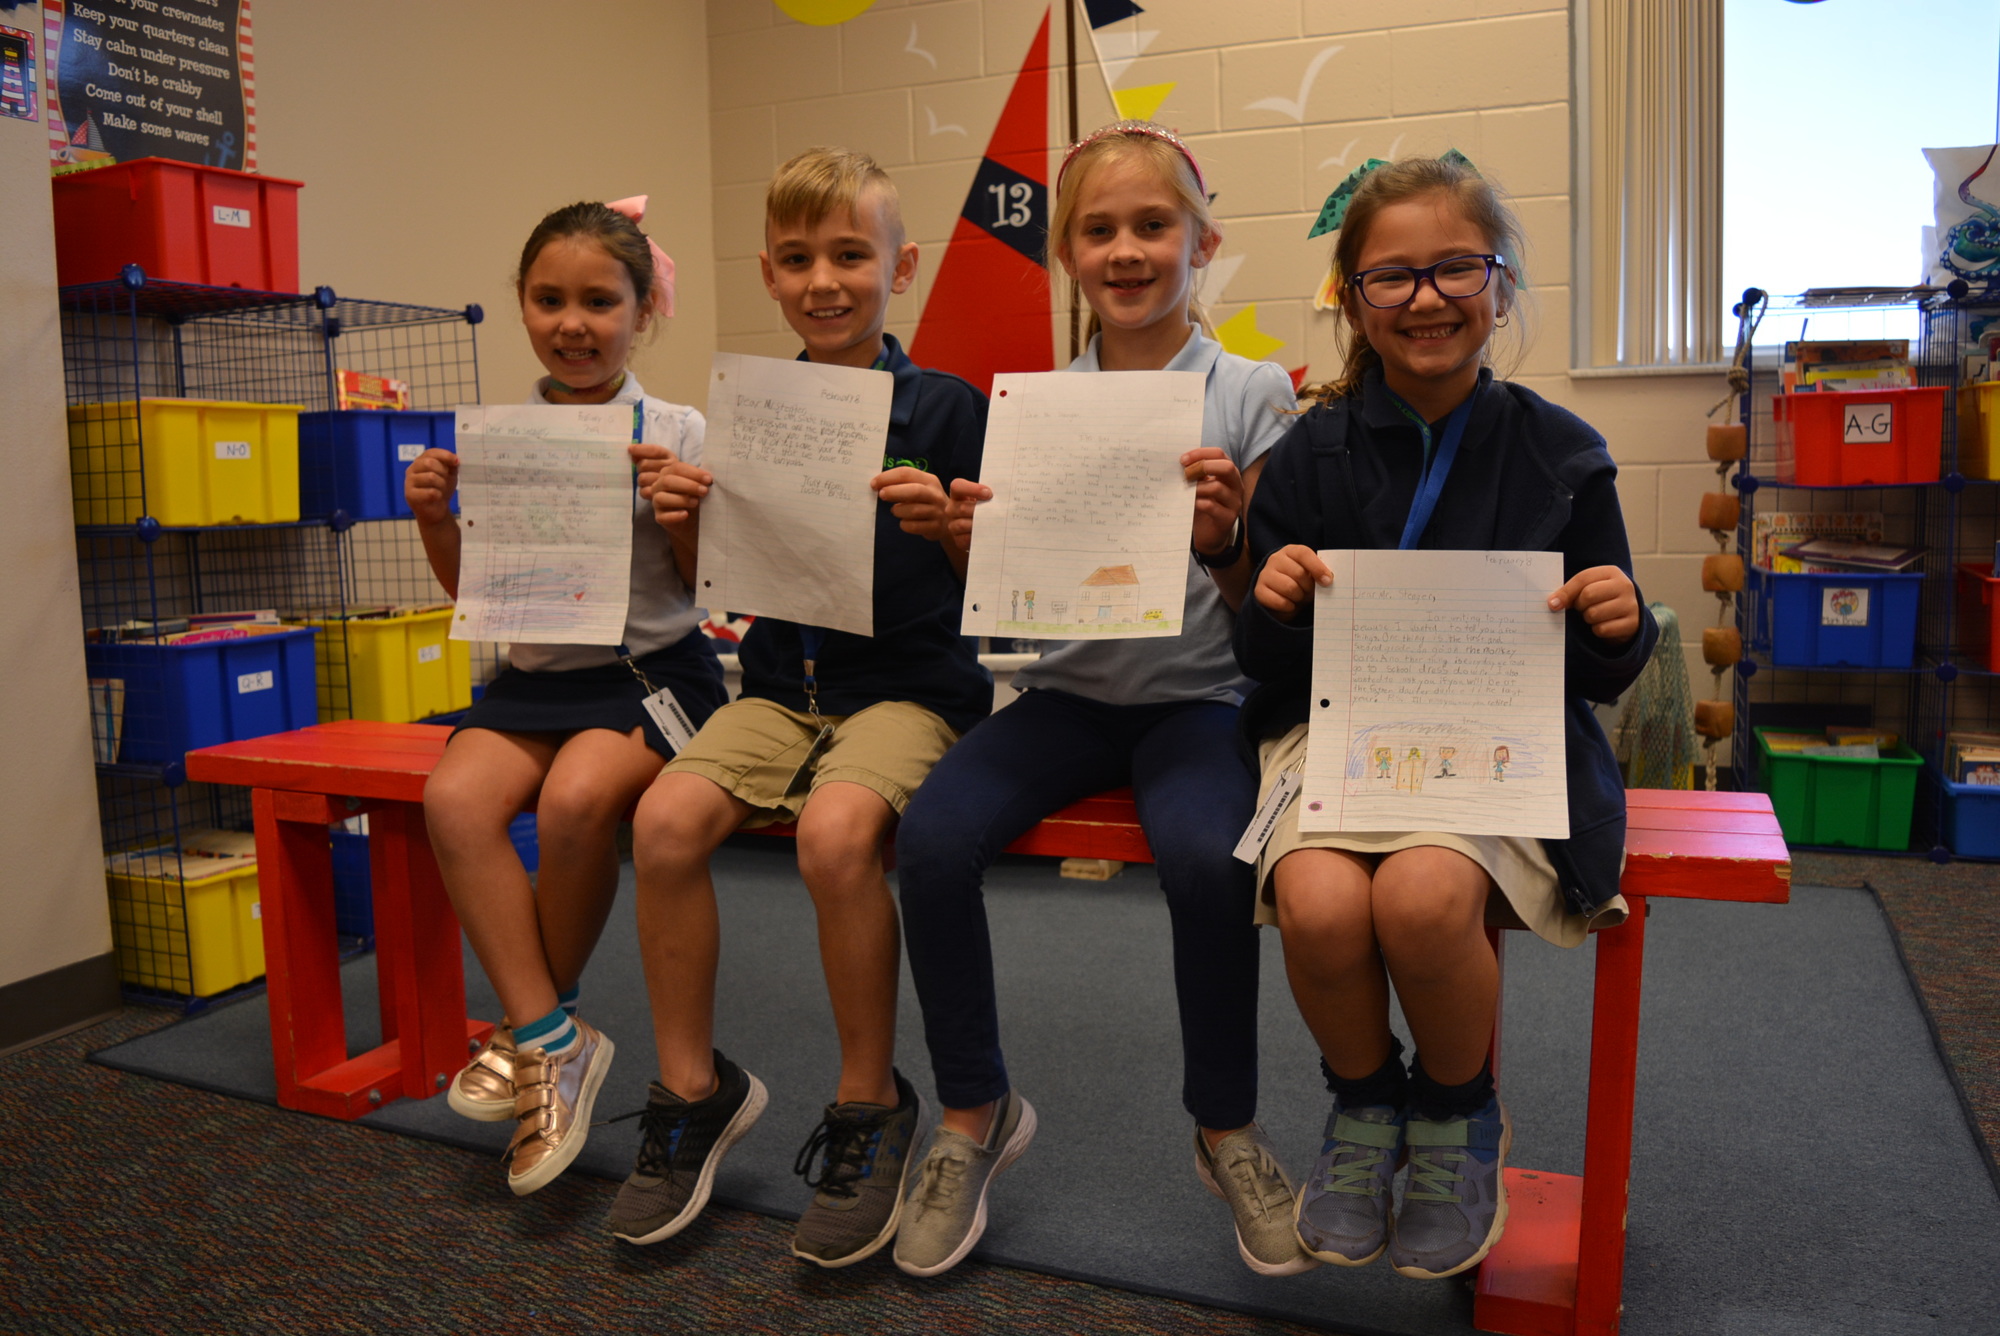 Second-grade teacher Laurie Rahn's students Ava Sarid, Tucker Briggs, Mia McLaughlan and Emilia Gonzalez show off letters they wrote to Principal Bill Stenger as part of a 